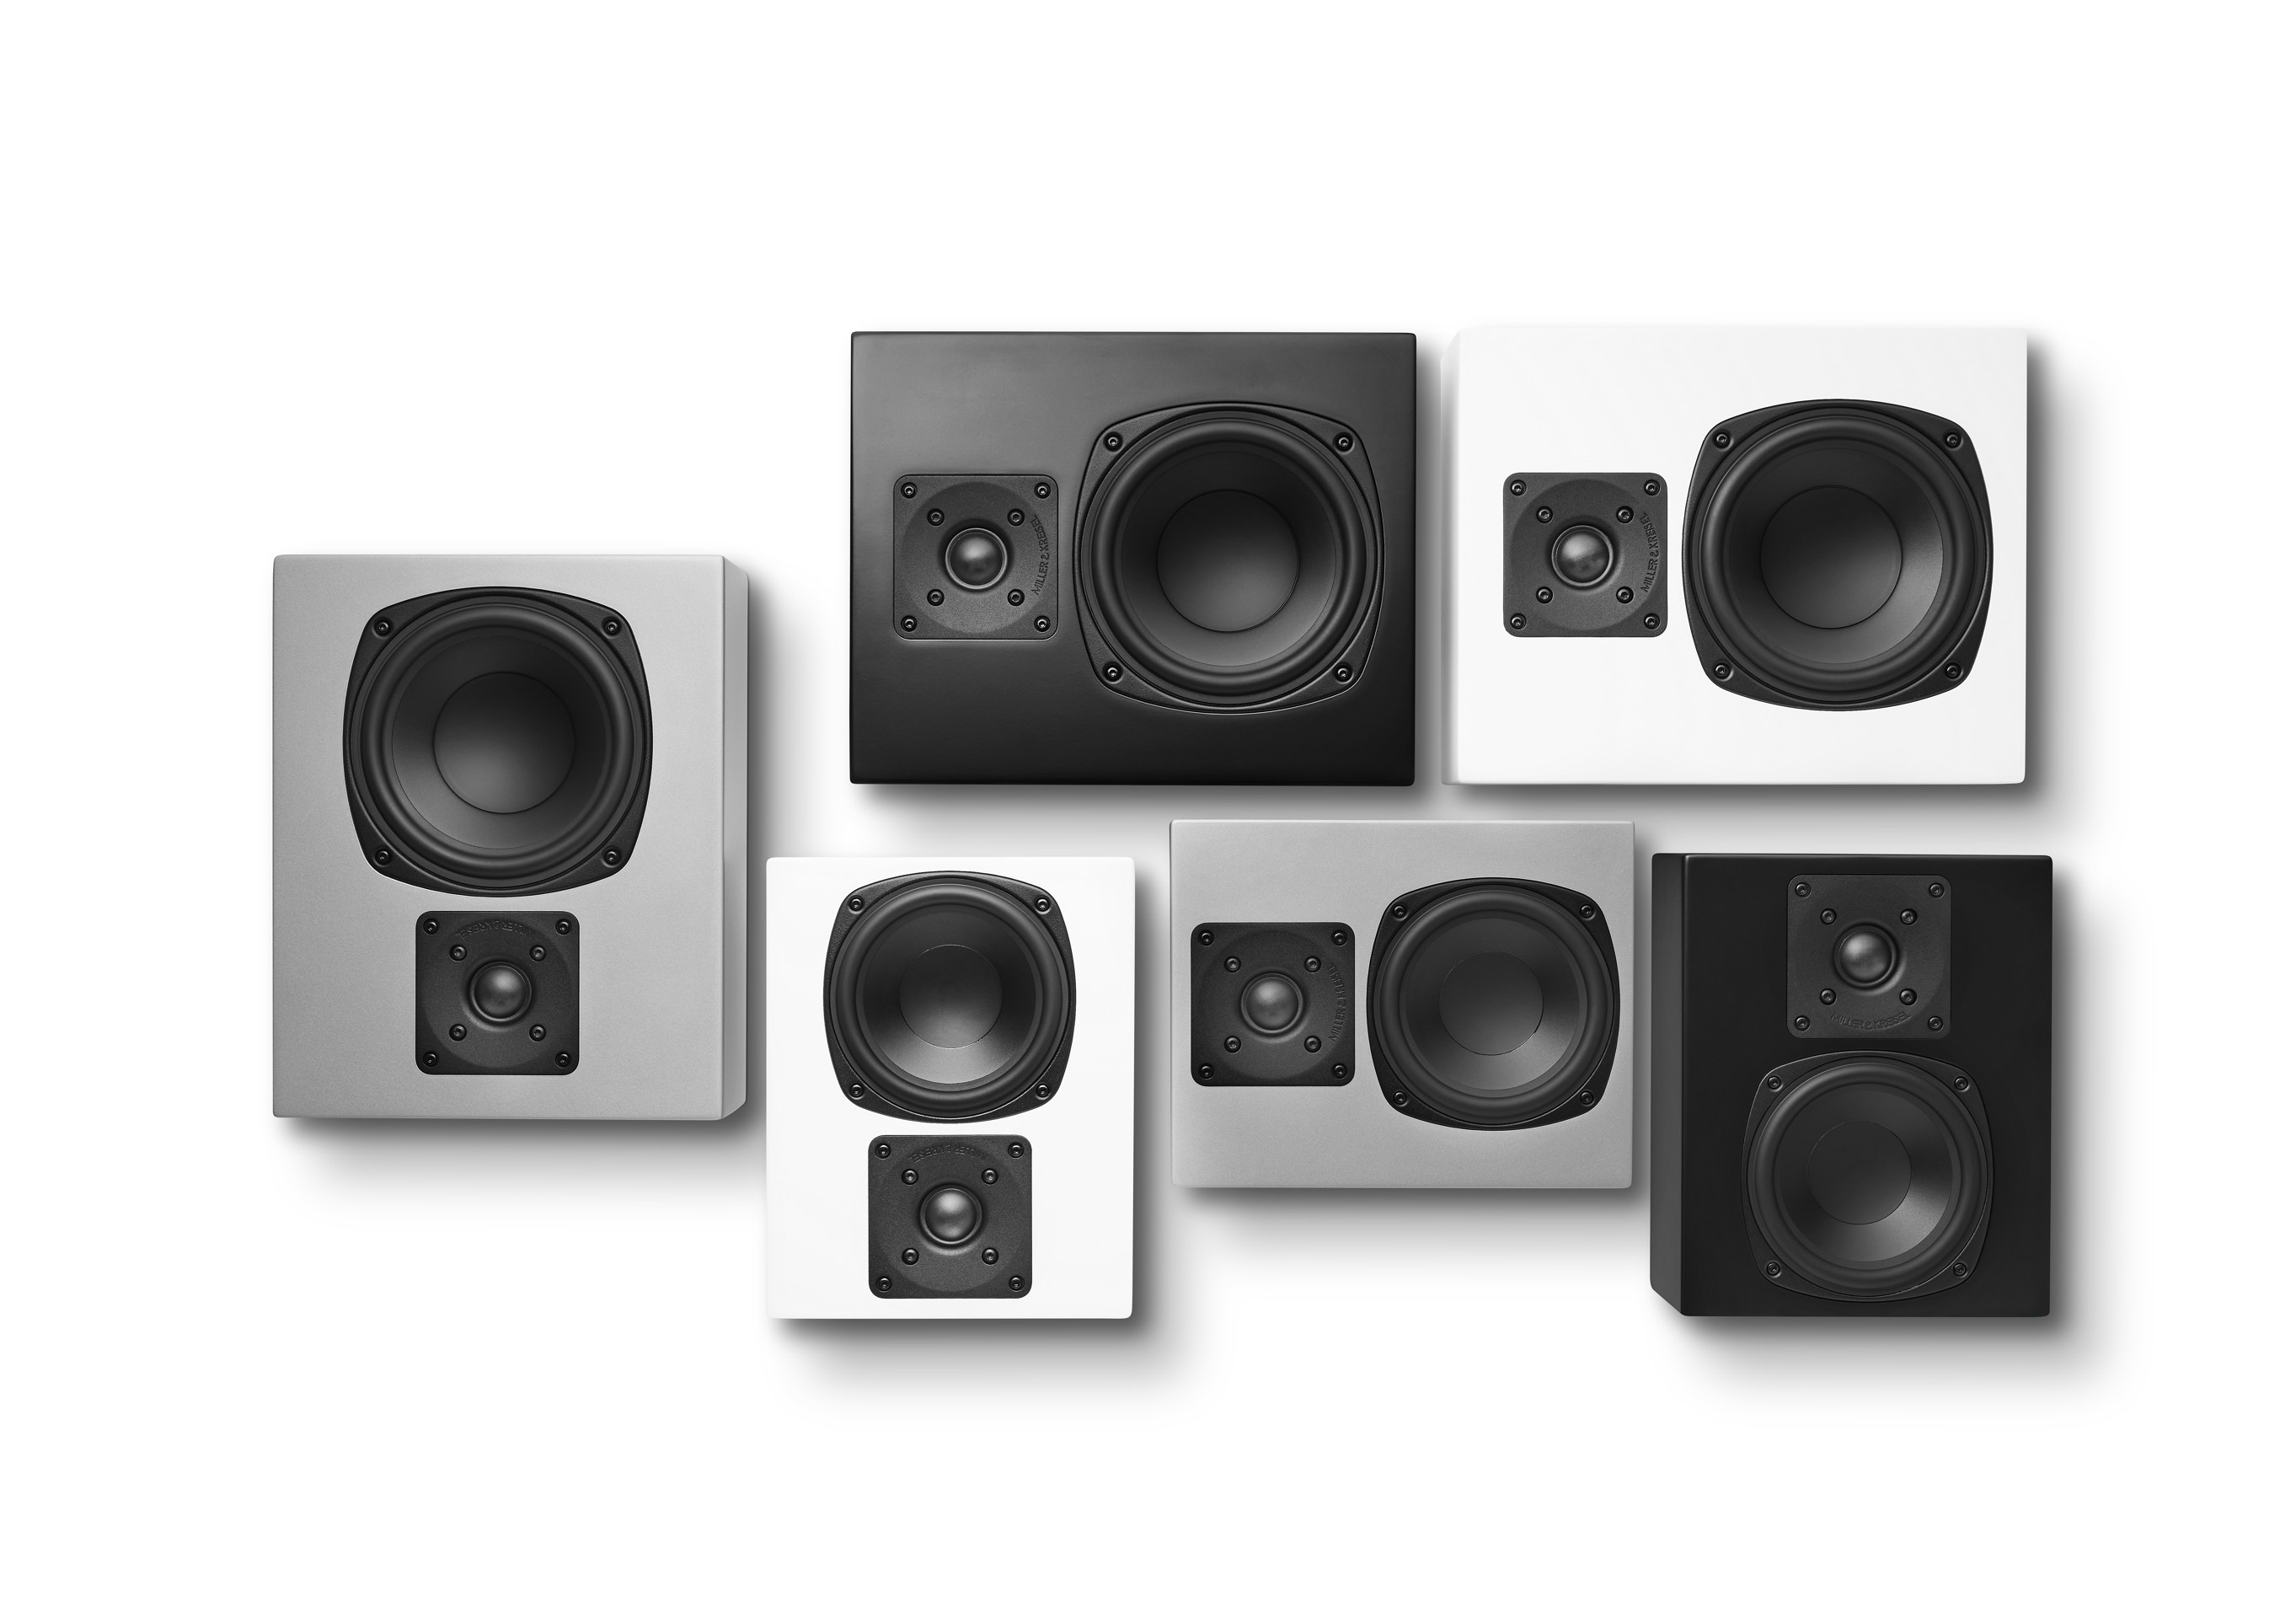 The D series showcasing all three colors for both the D85 and D95